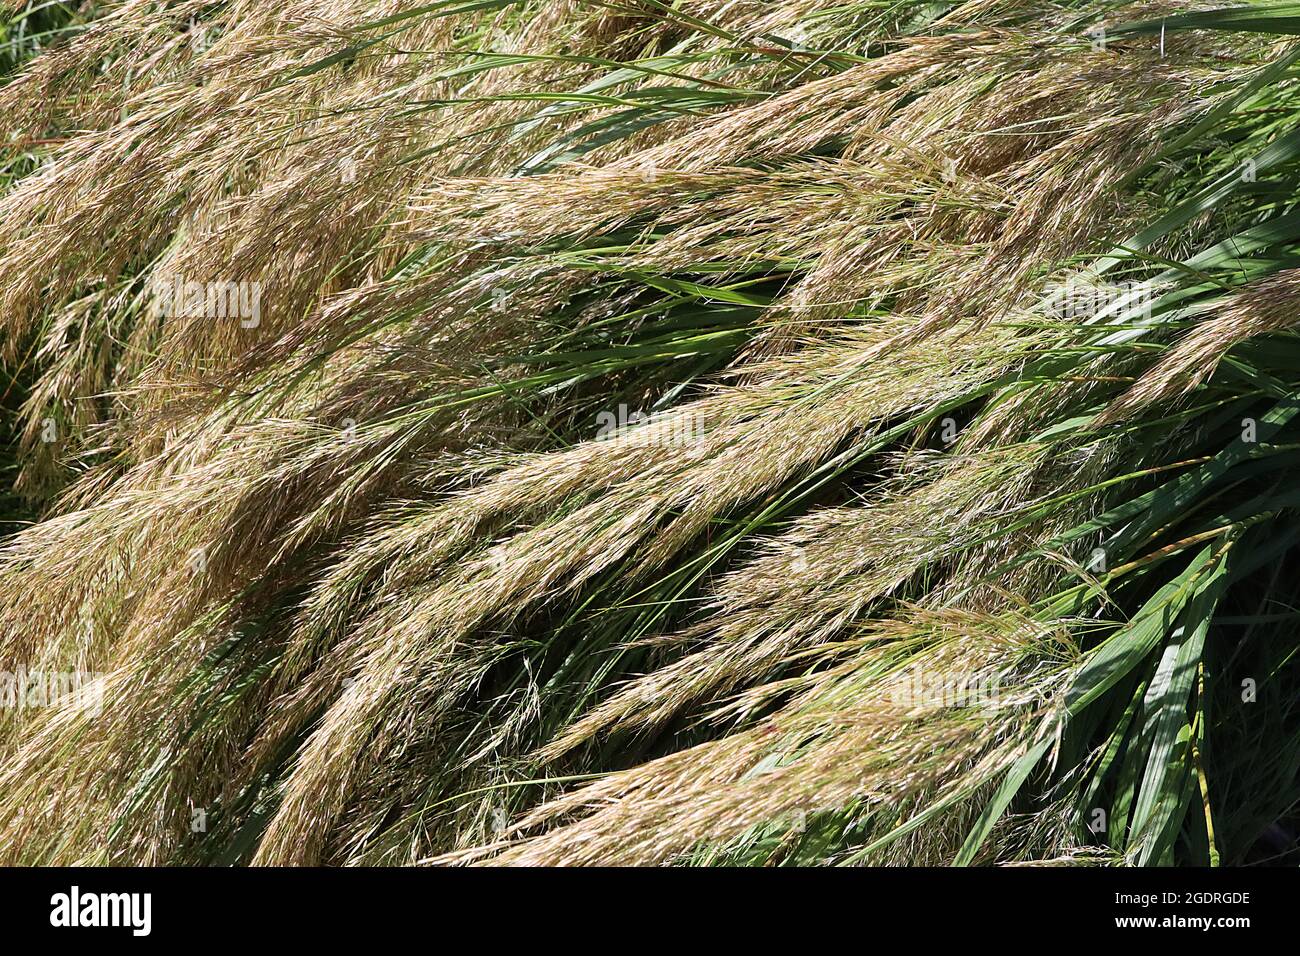 Stipa calamagrostis rough feather grass – long feathery arching plumes of buff panicles and mid green stems,  July, England, UK Stock Photo